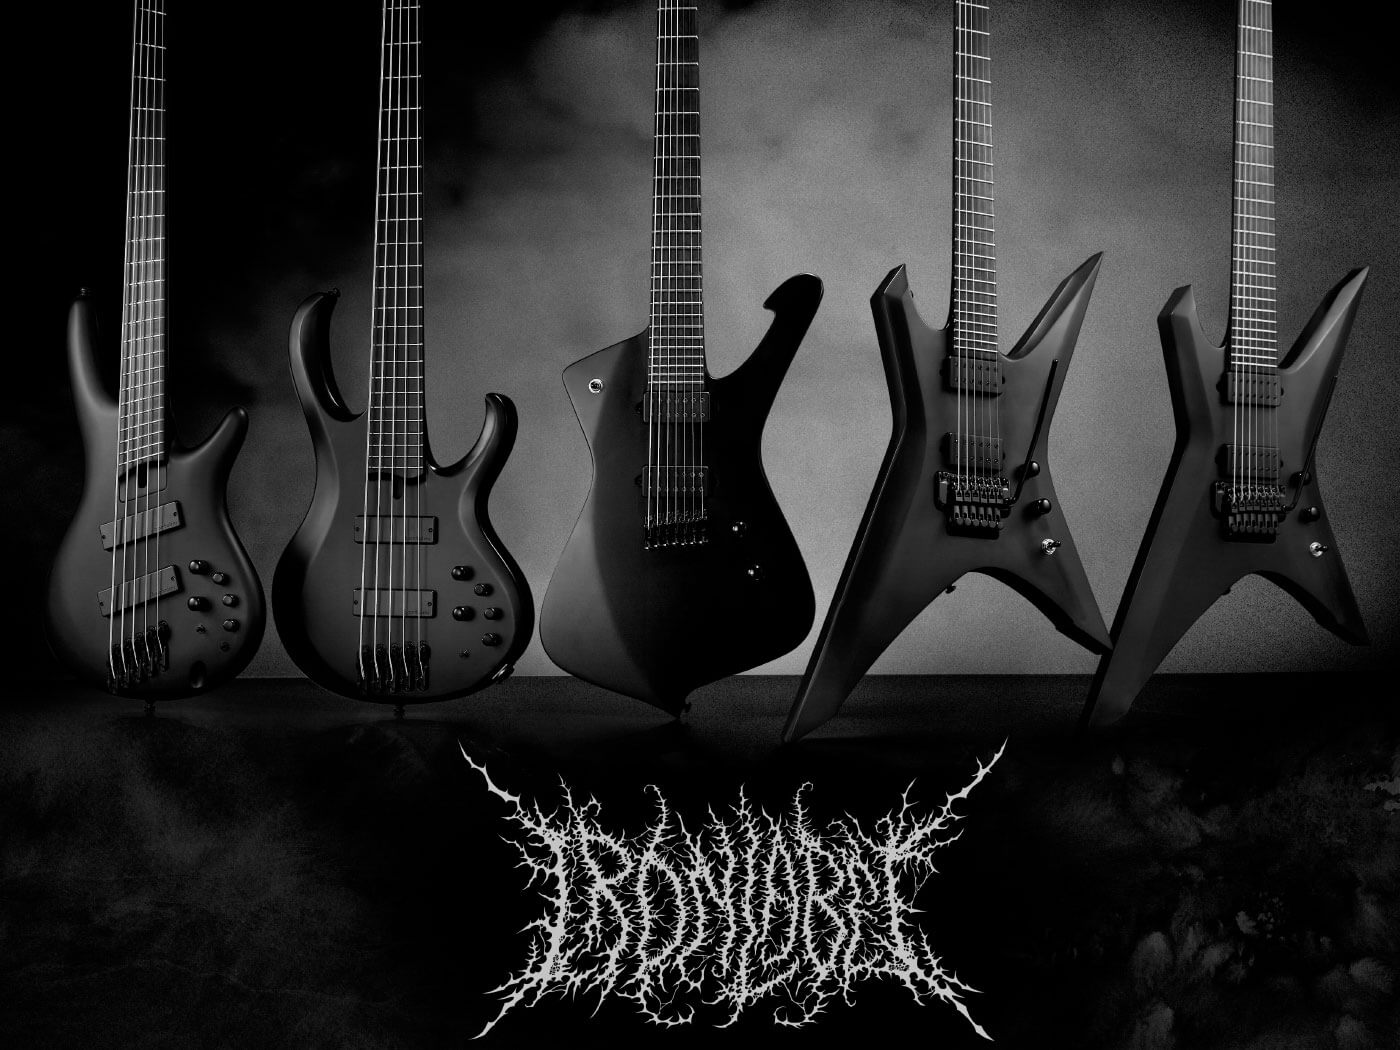 A Brief History of Ibanez guitars